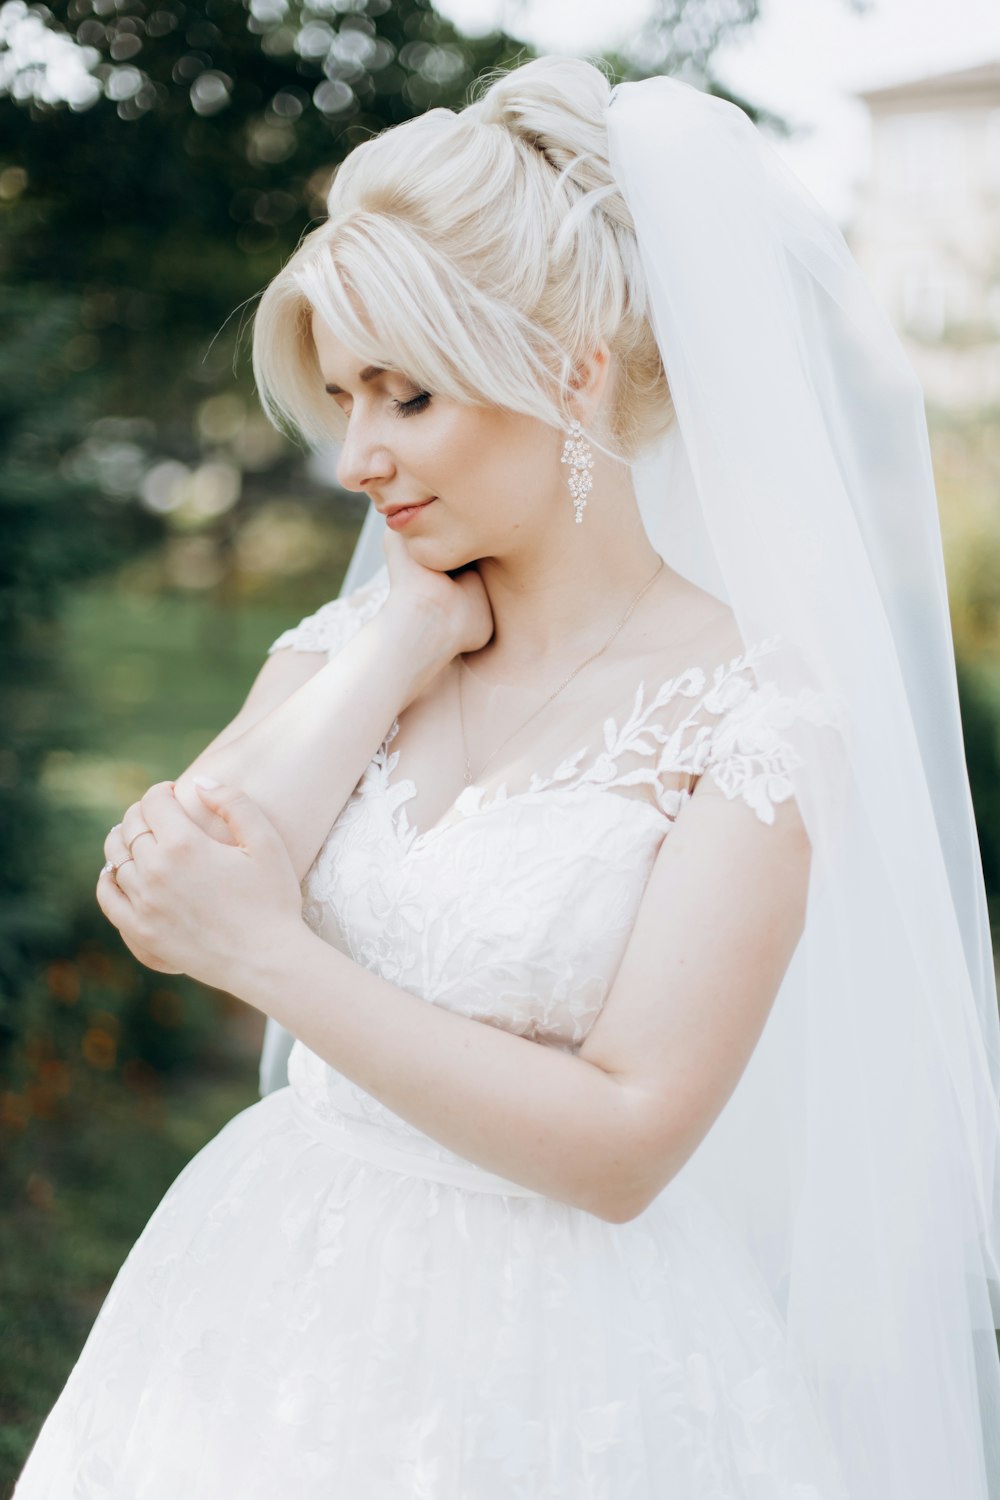 woman in white wedding dress standing at daytime